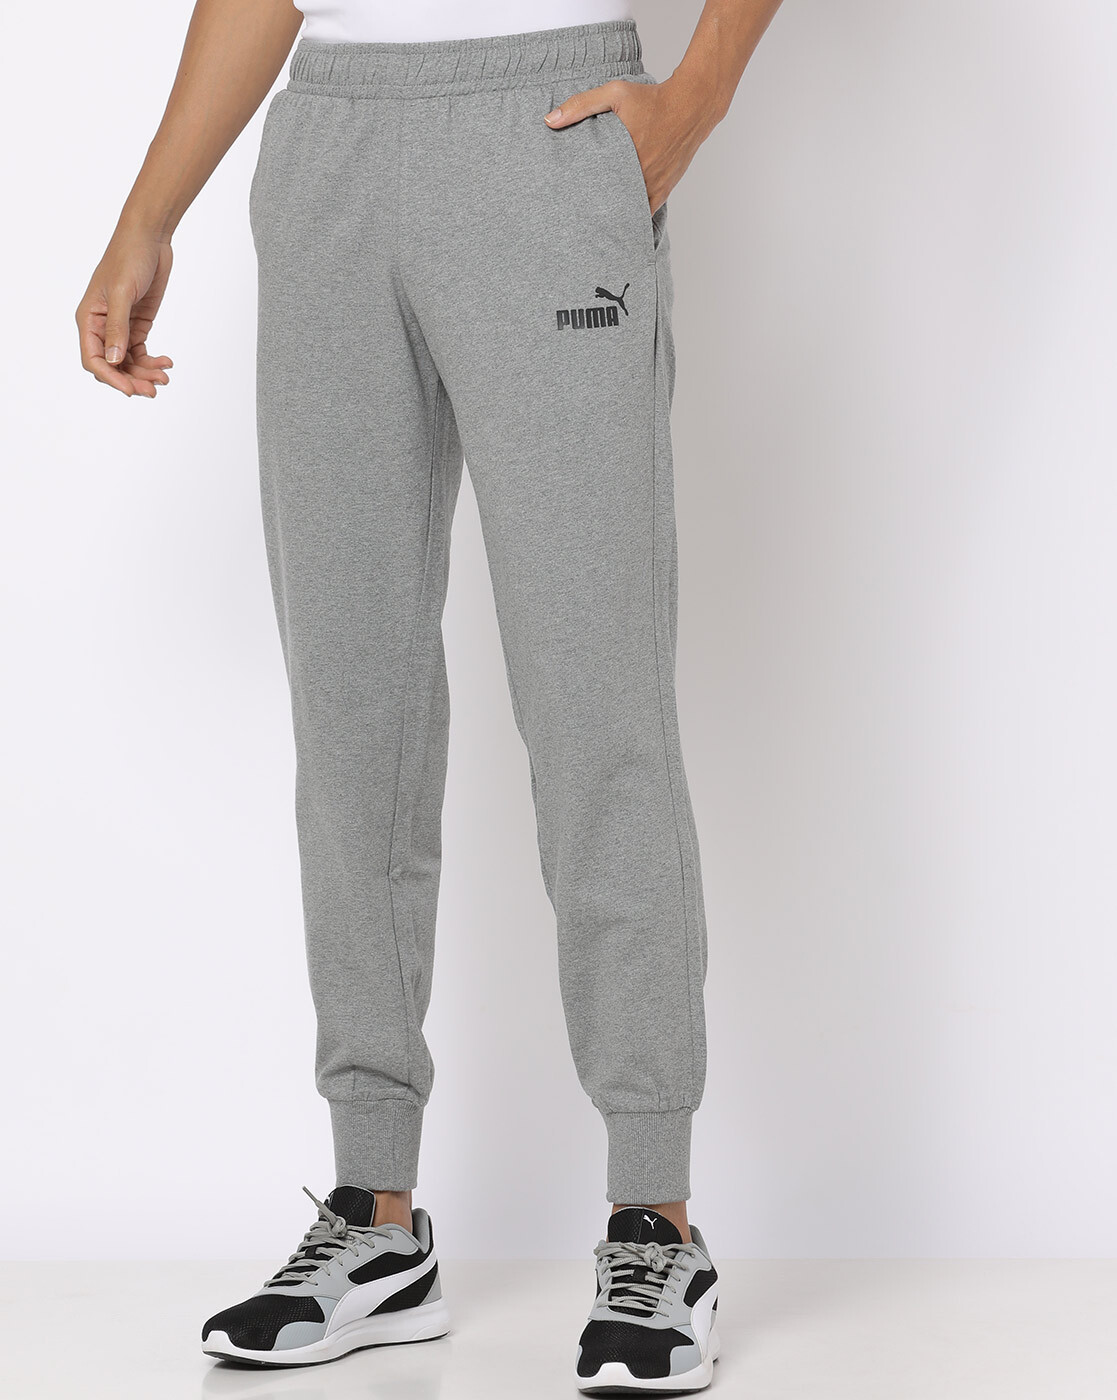 Buy PUMA Trousers online  Men  510 products  FASHIOLAin